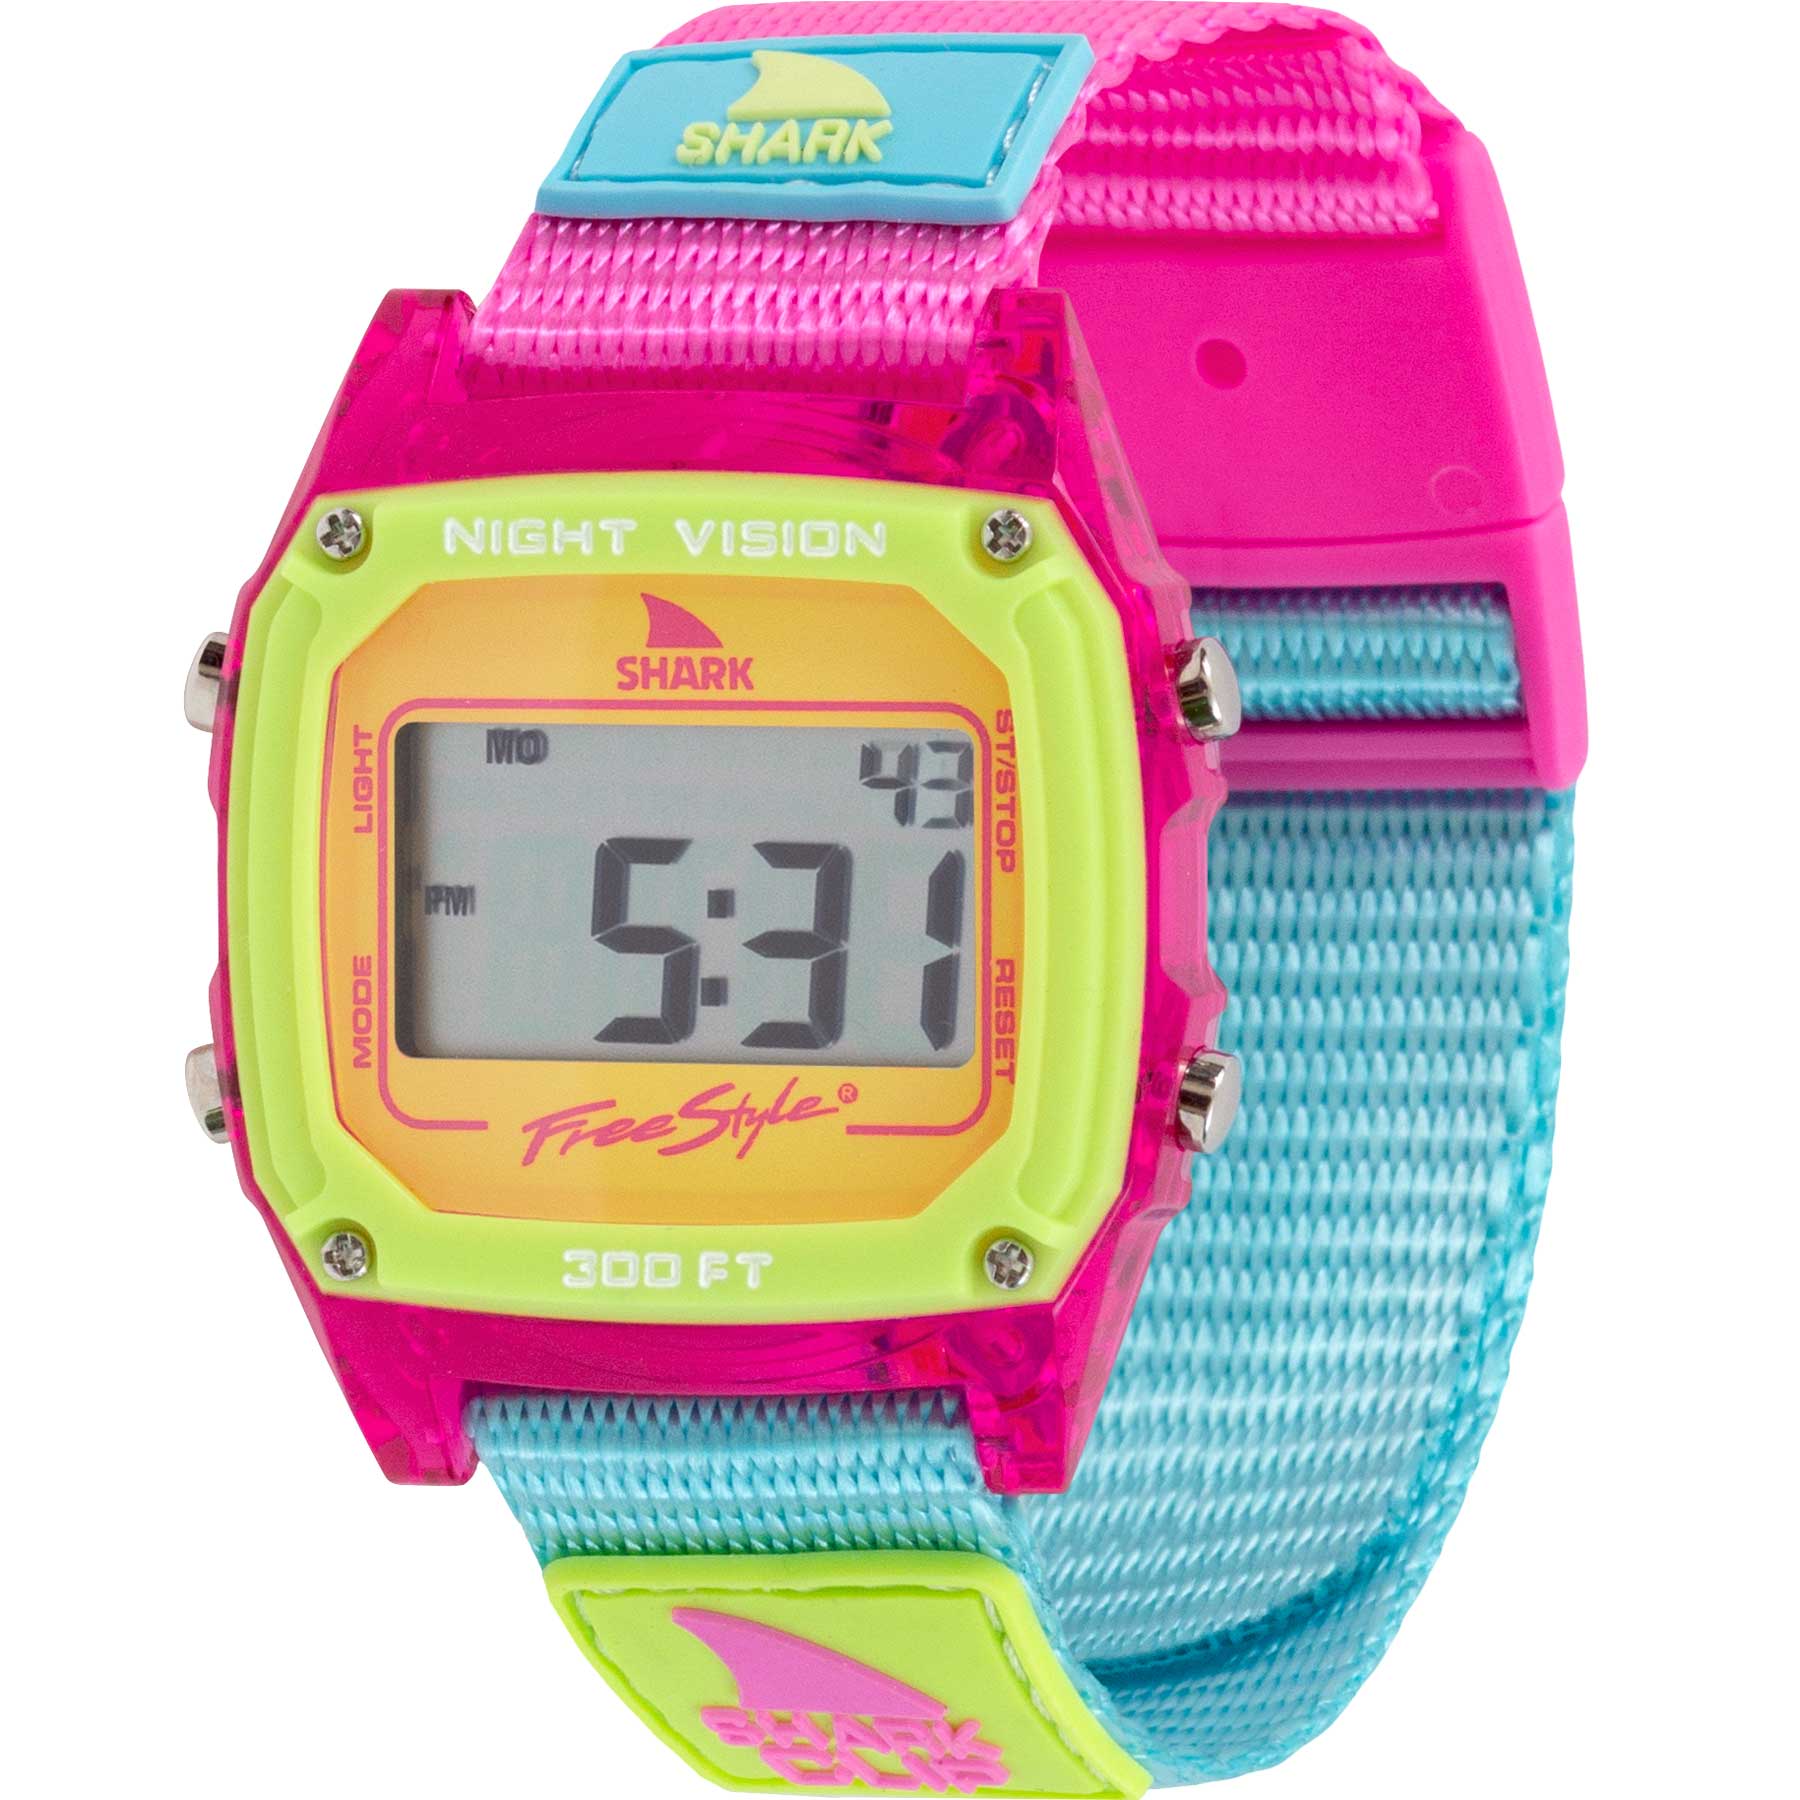 Freestyle, Classic Clip Shark Watch (Popsicle Pink)